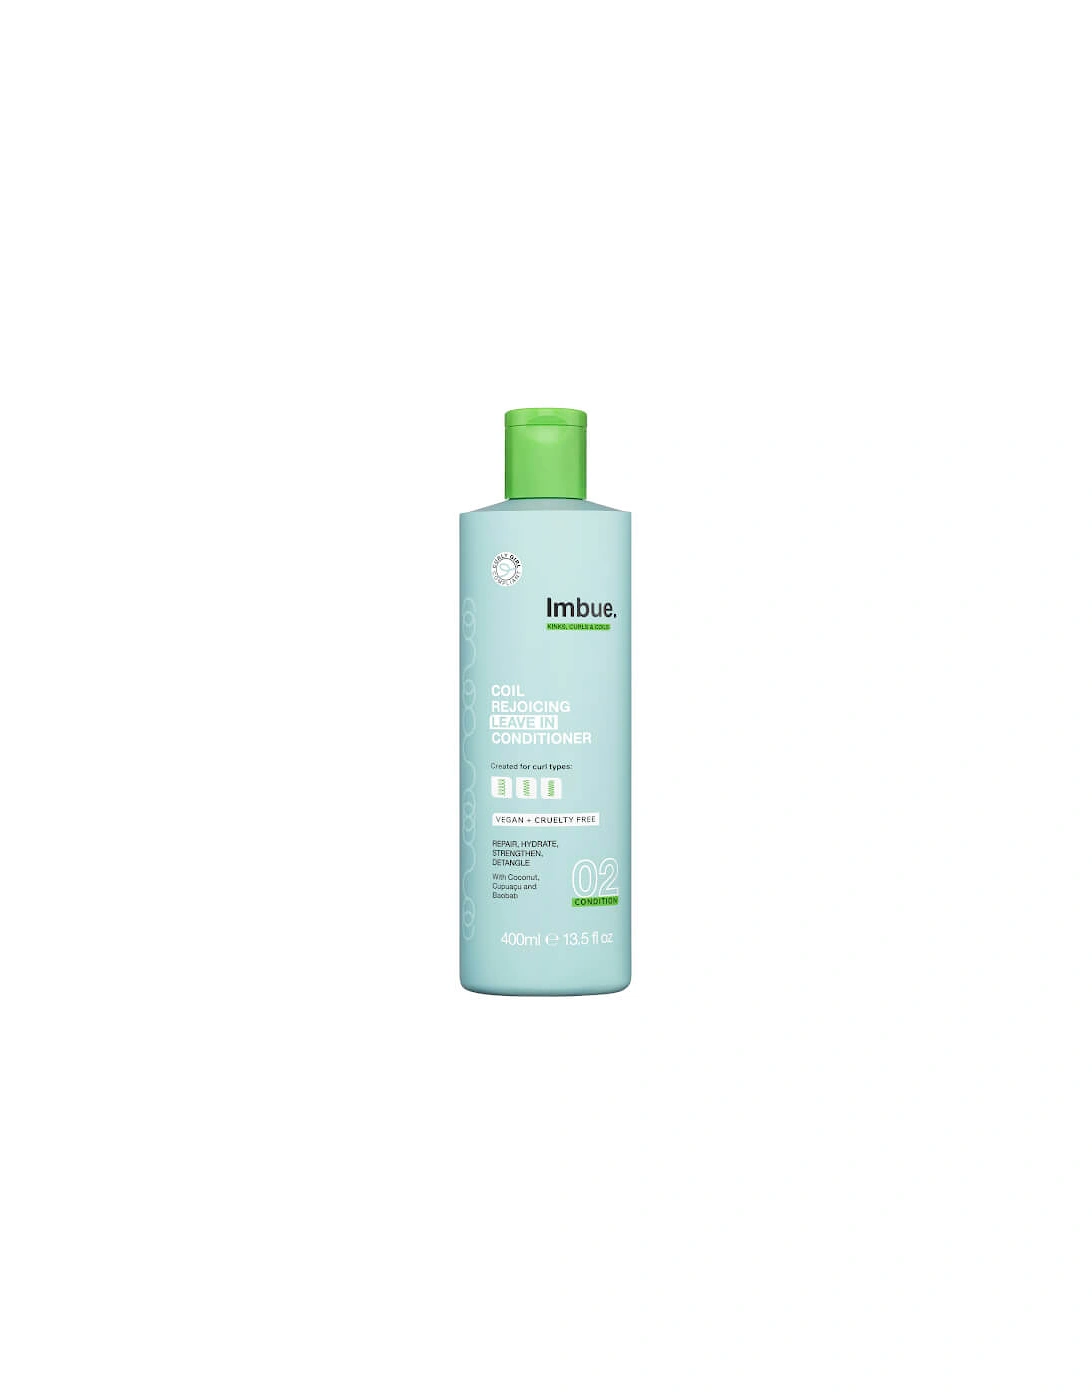 Coil Rejoicing Leave-in Conditioner 400ml - Imbue, 2 of 1